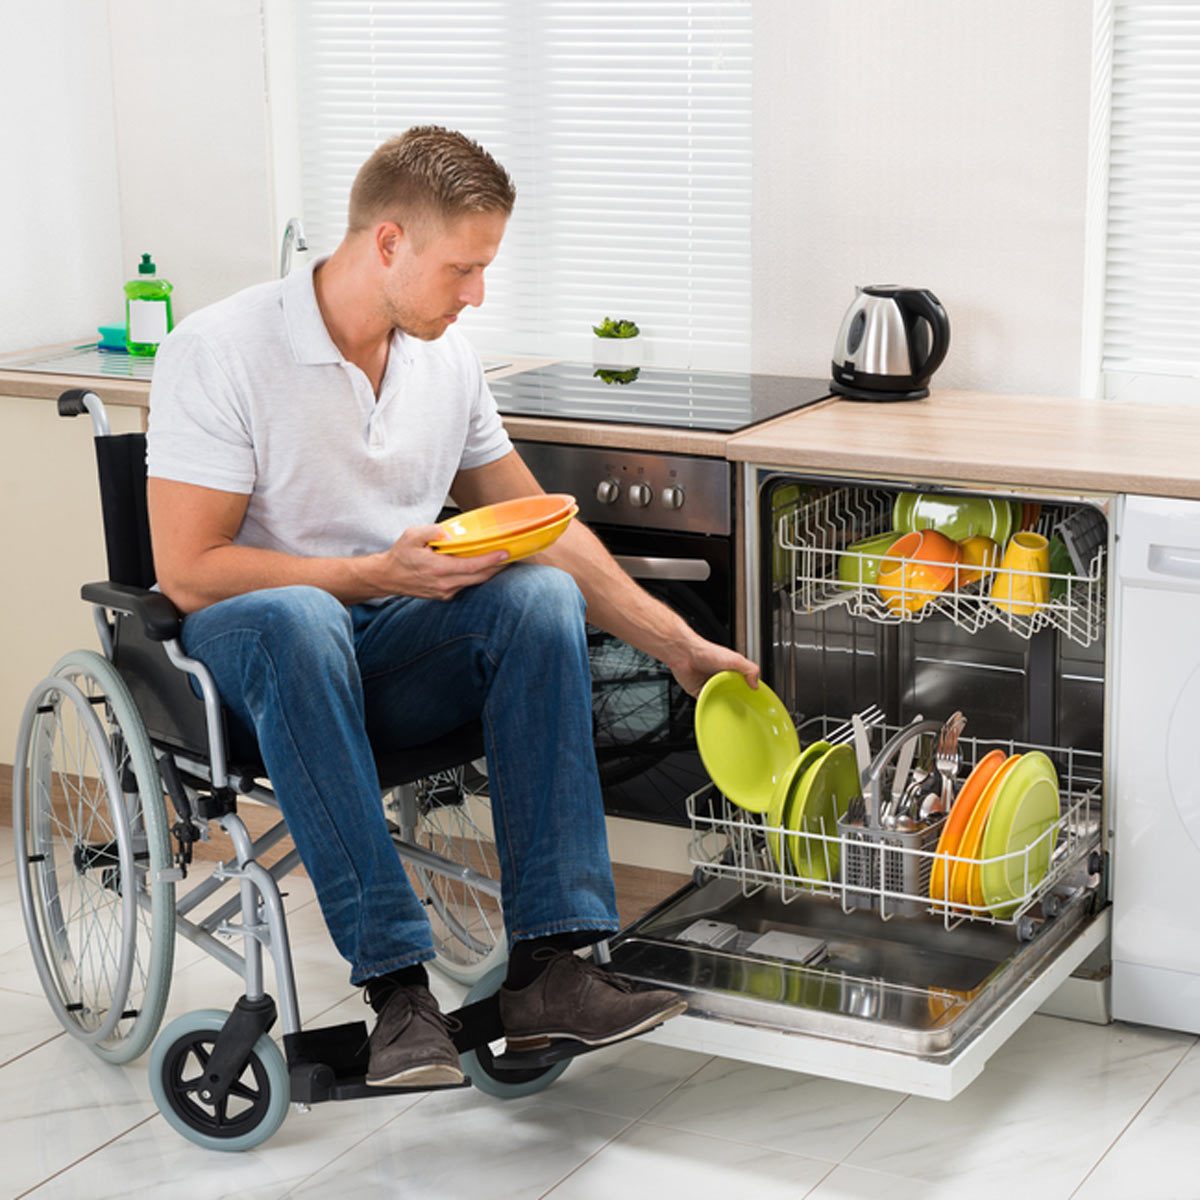 10 ways to make your home more handicap accessible